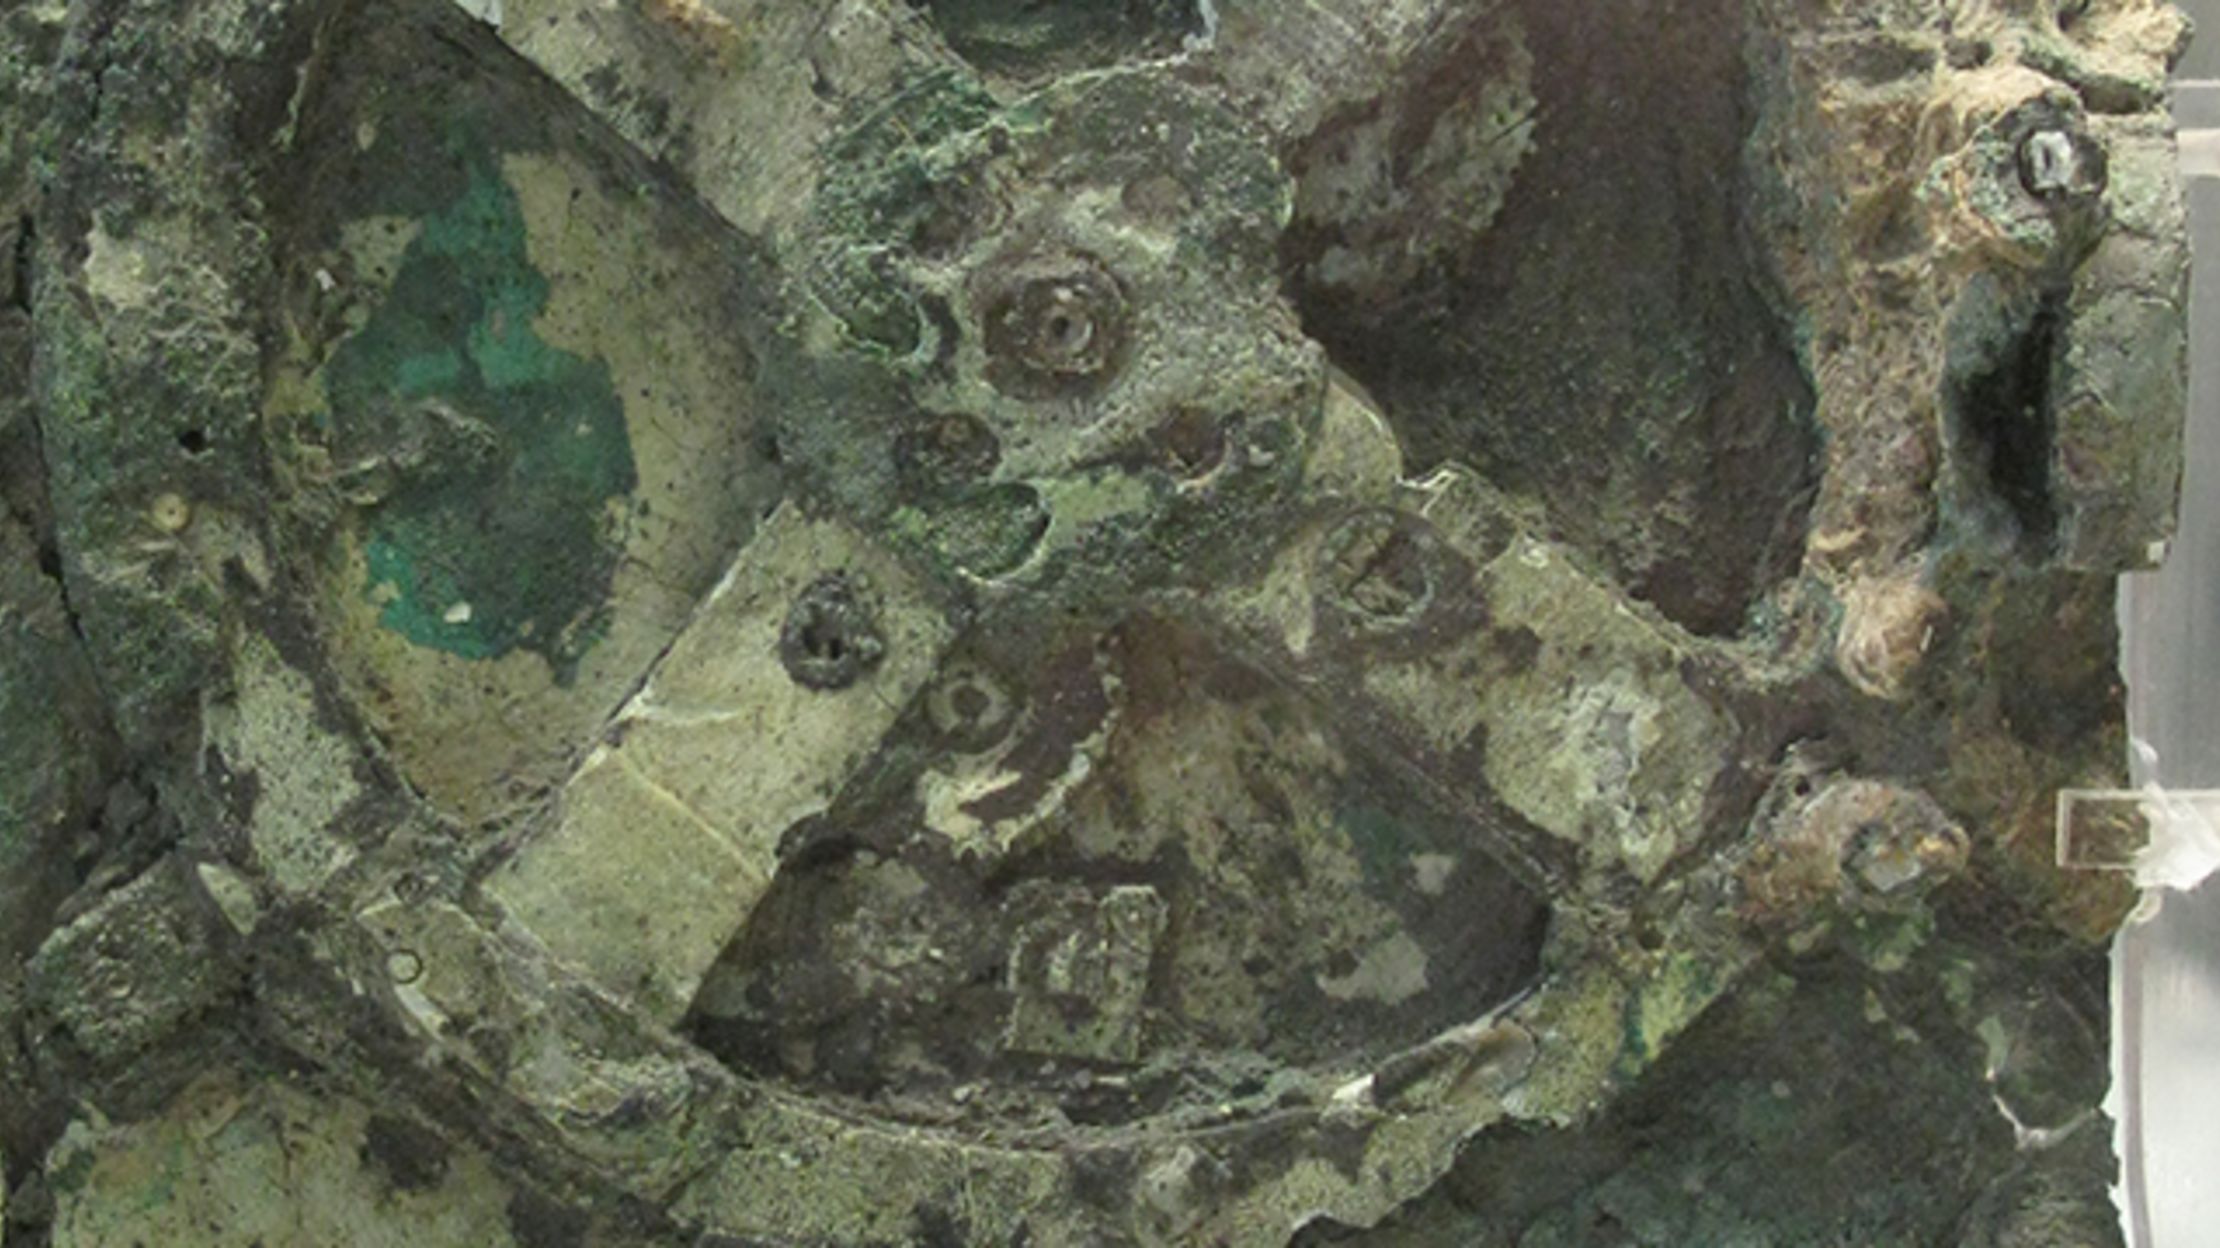 15 Intriguing Facts About the Antikythera Mechanism